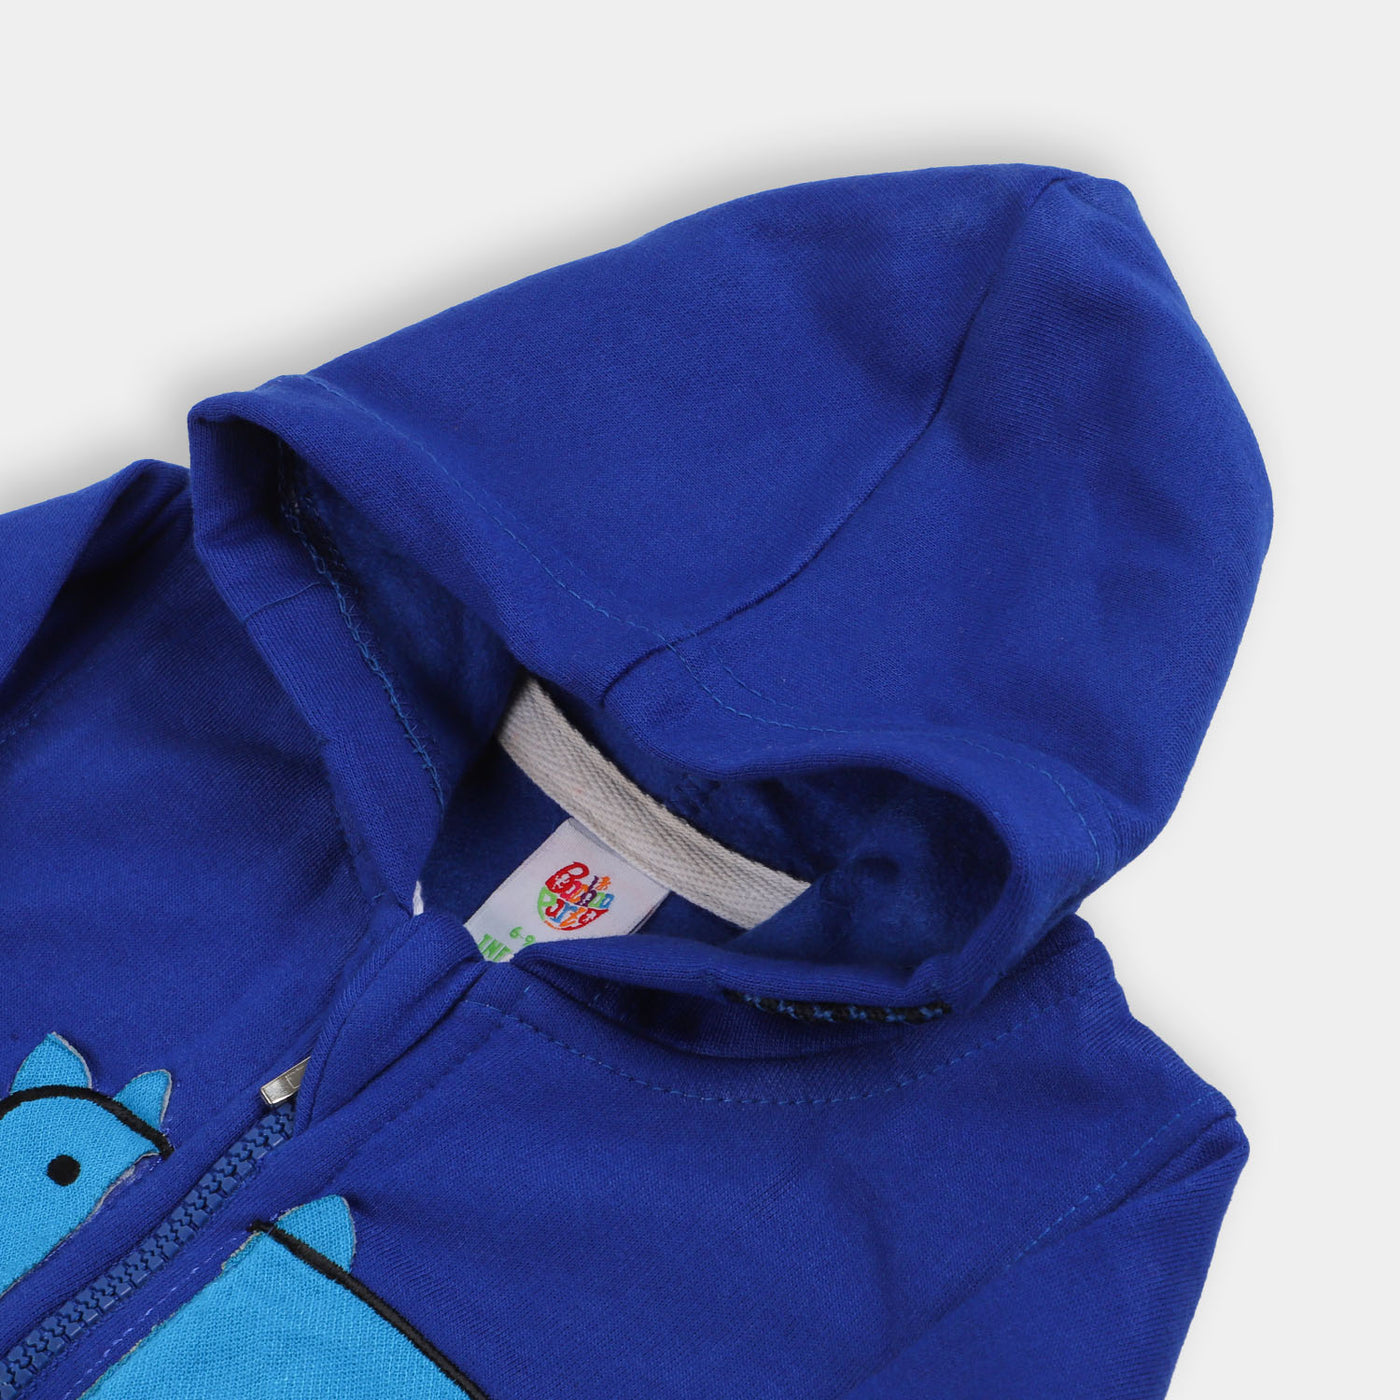 Infant Boys Knitted Hooded Jacket Dino - Royal Blue